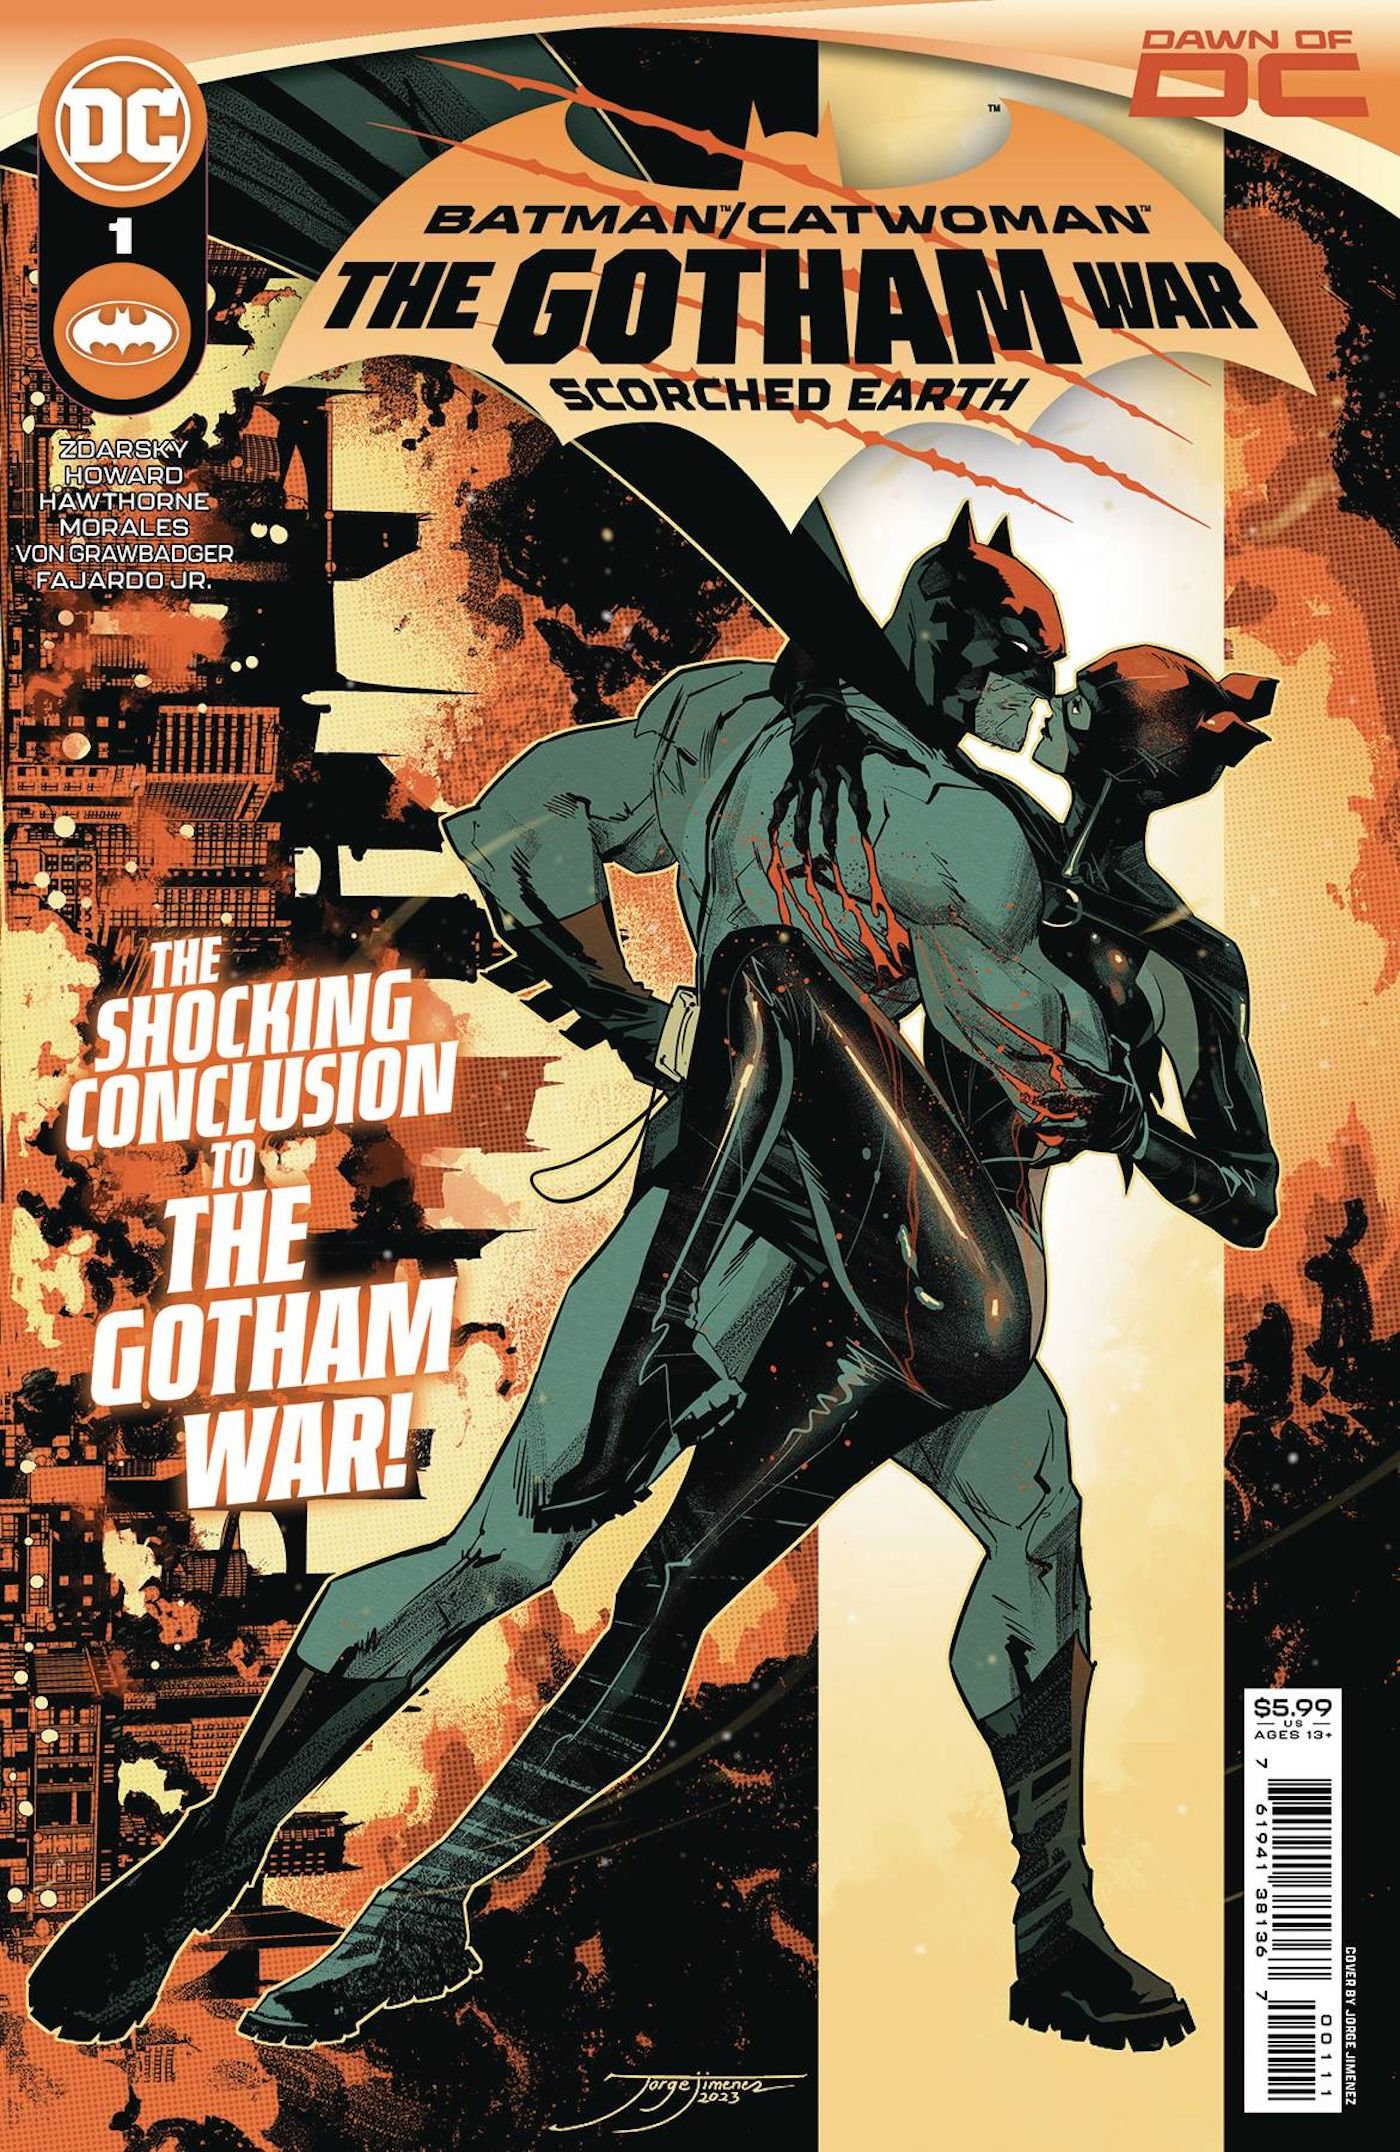 Batman:Catwoman: The Gotham War - Scorched Earth 1 Main Cover